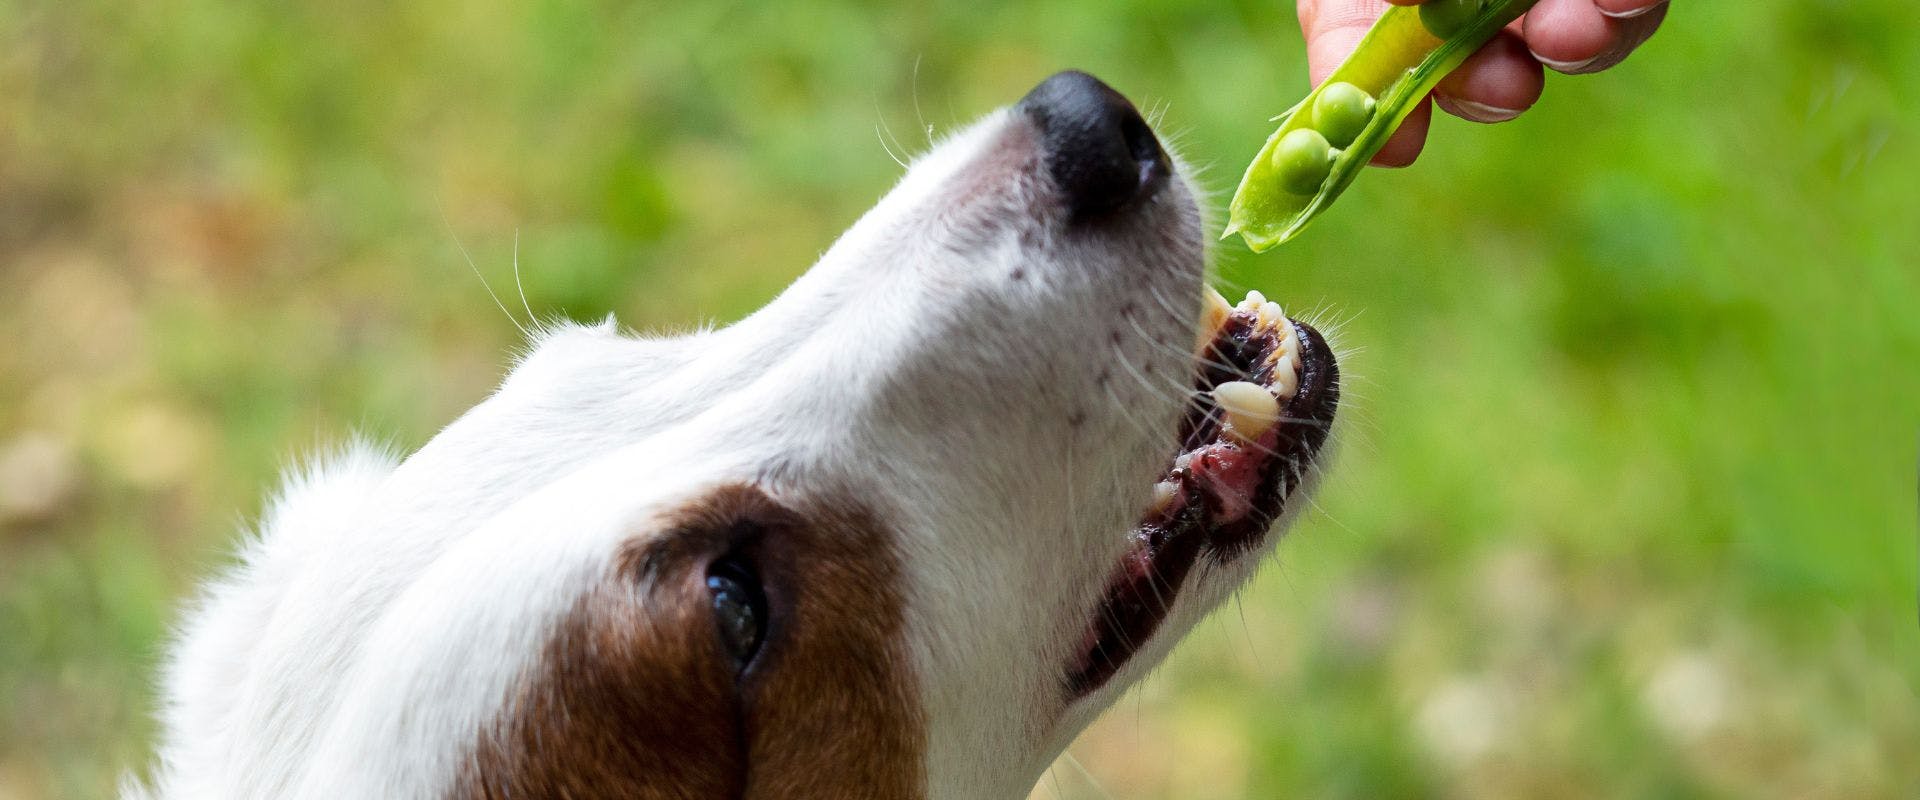 Jack Russell dog eating peas from a pod